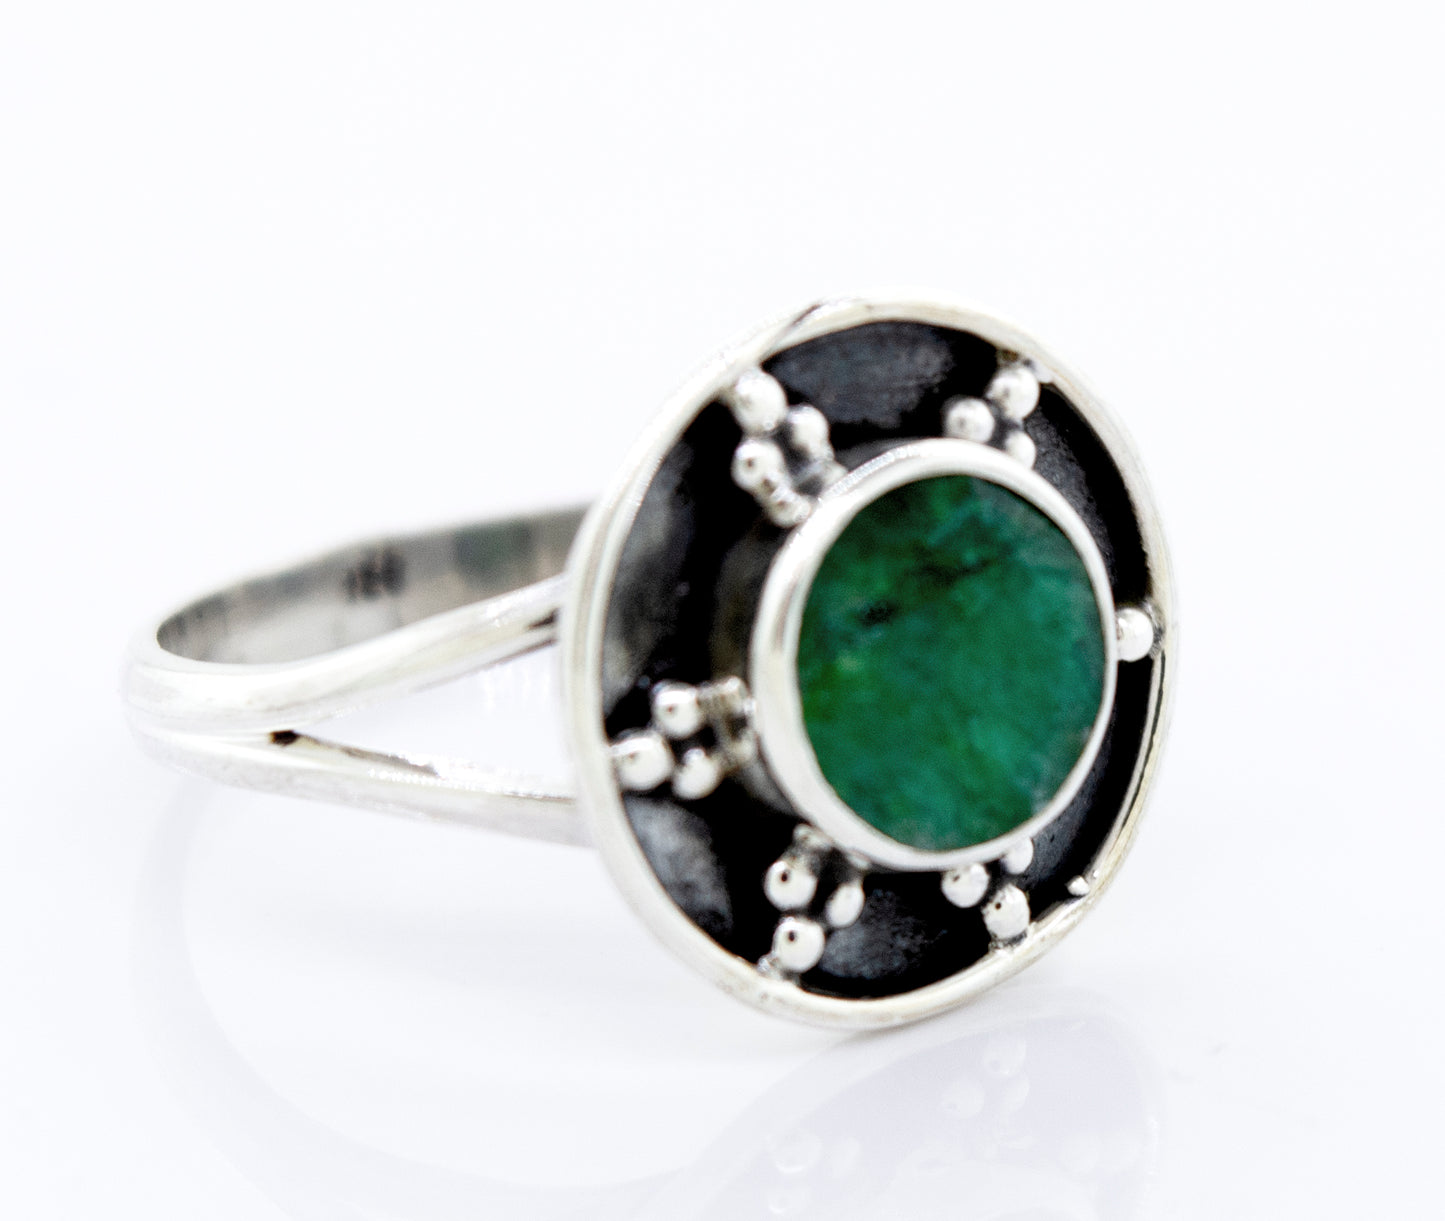 
                  
                    A Gemstone Ring With Unique Oxidized Design with a round green stone centerpiece, surrounded by small silver decorative elements on an oxidized silver circular background.
                  
                